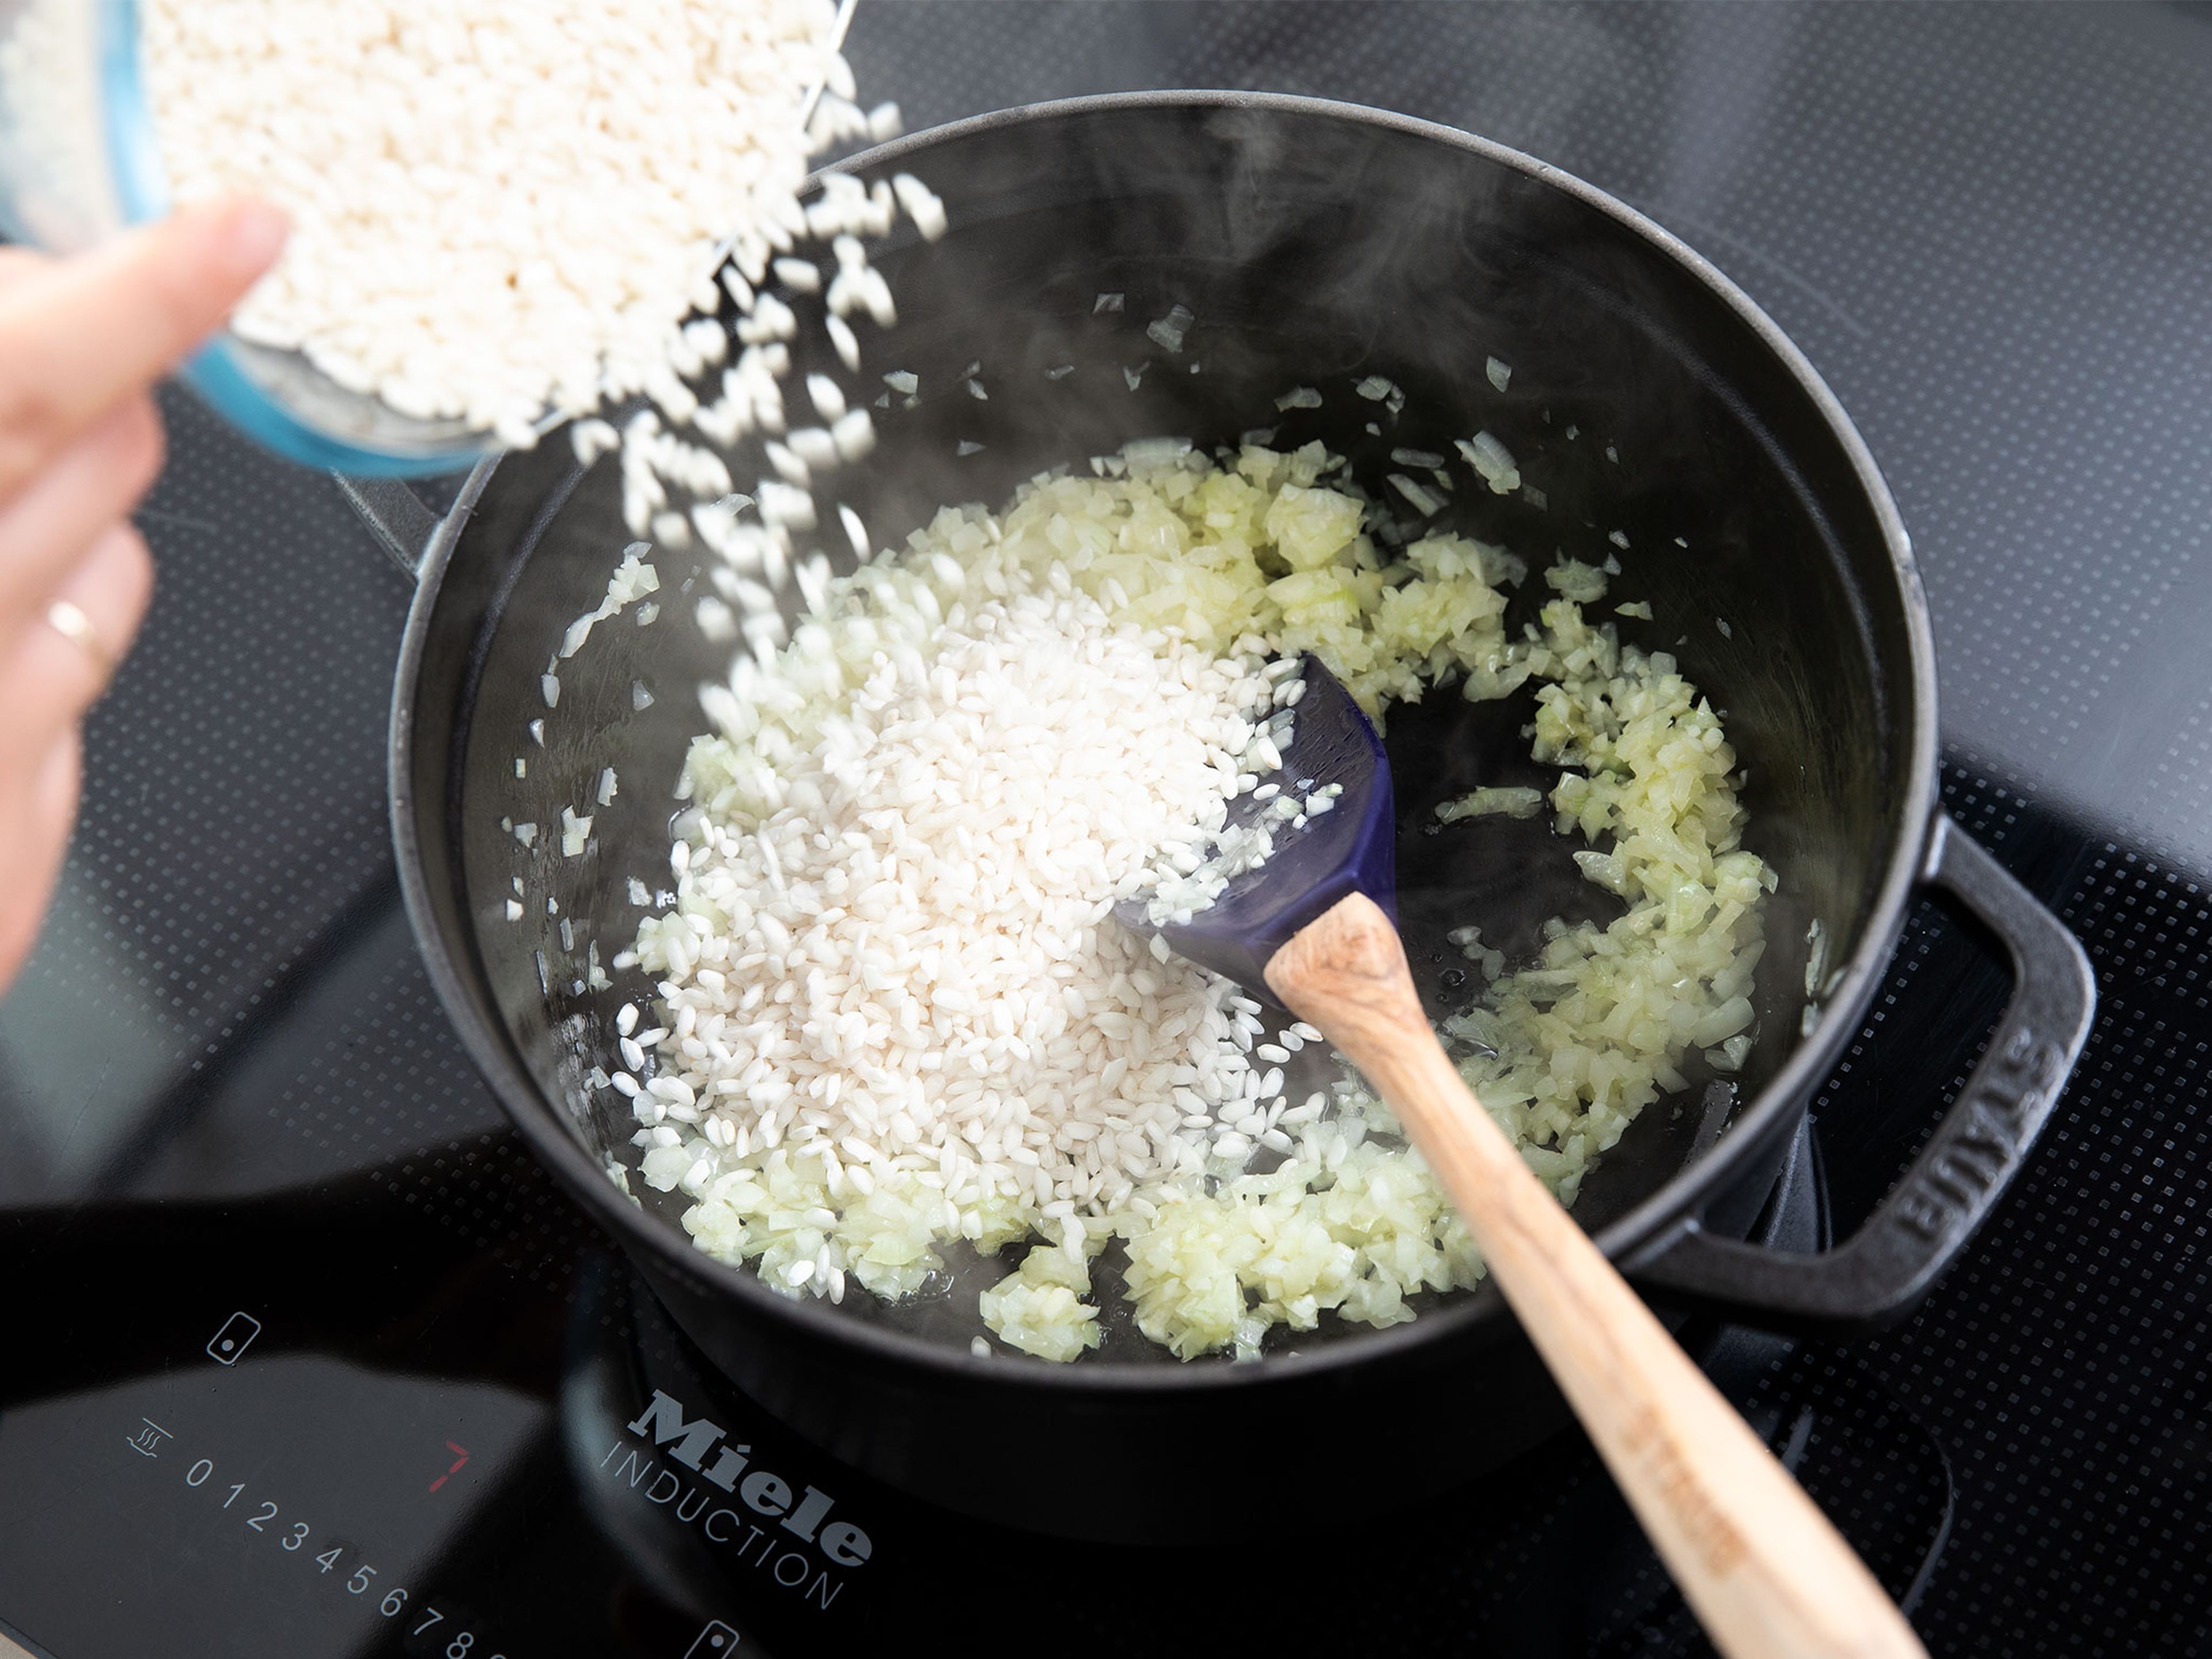 Heat half of the olive oil in a large pot over medium heat and fry onion and garlic until translucent. Add risotto rice and keep frying until the rice gets translucent too, approx 5 min.